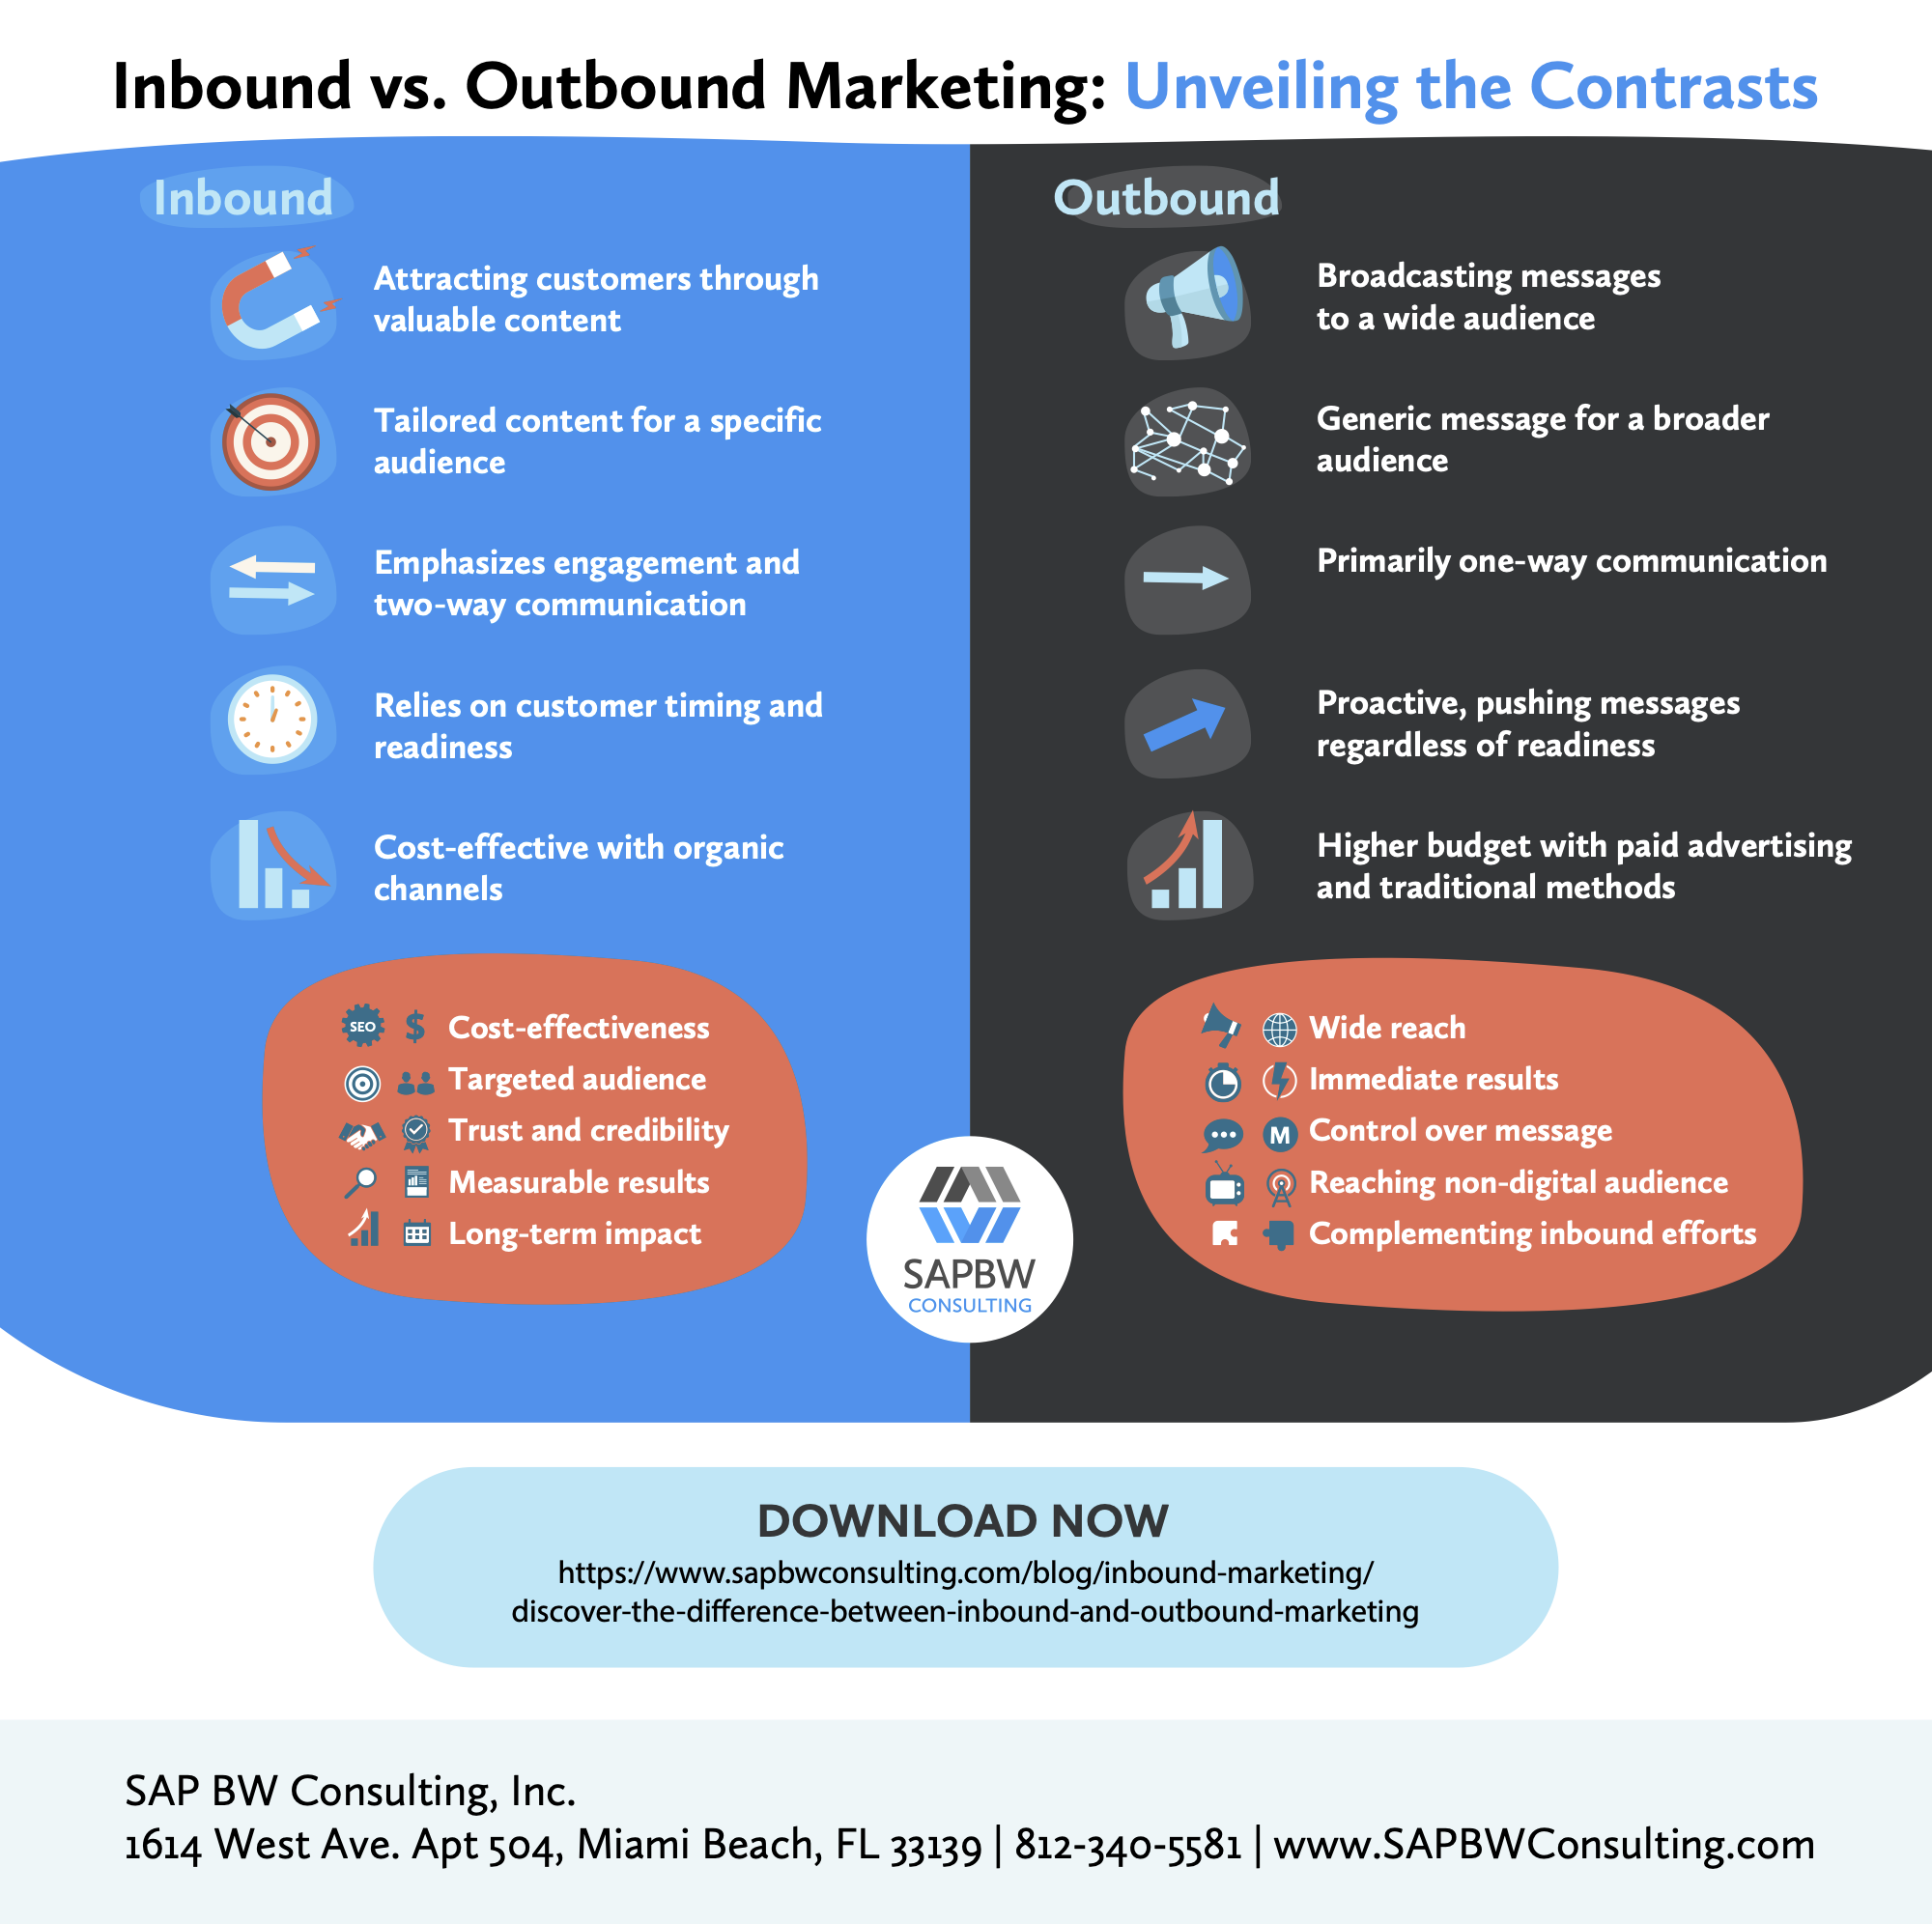 Difference Between Inbound vs Outbound Marketing